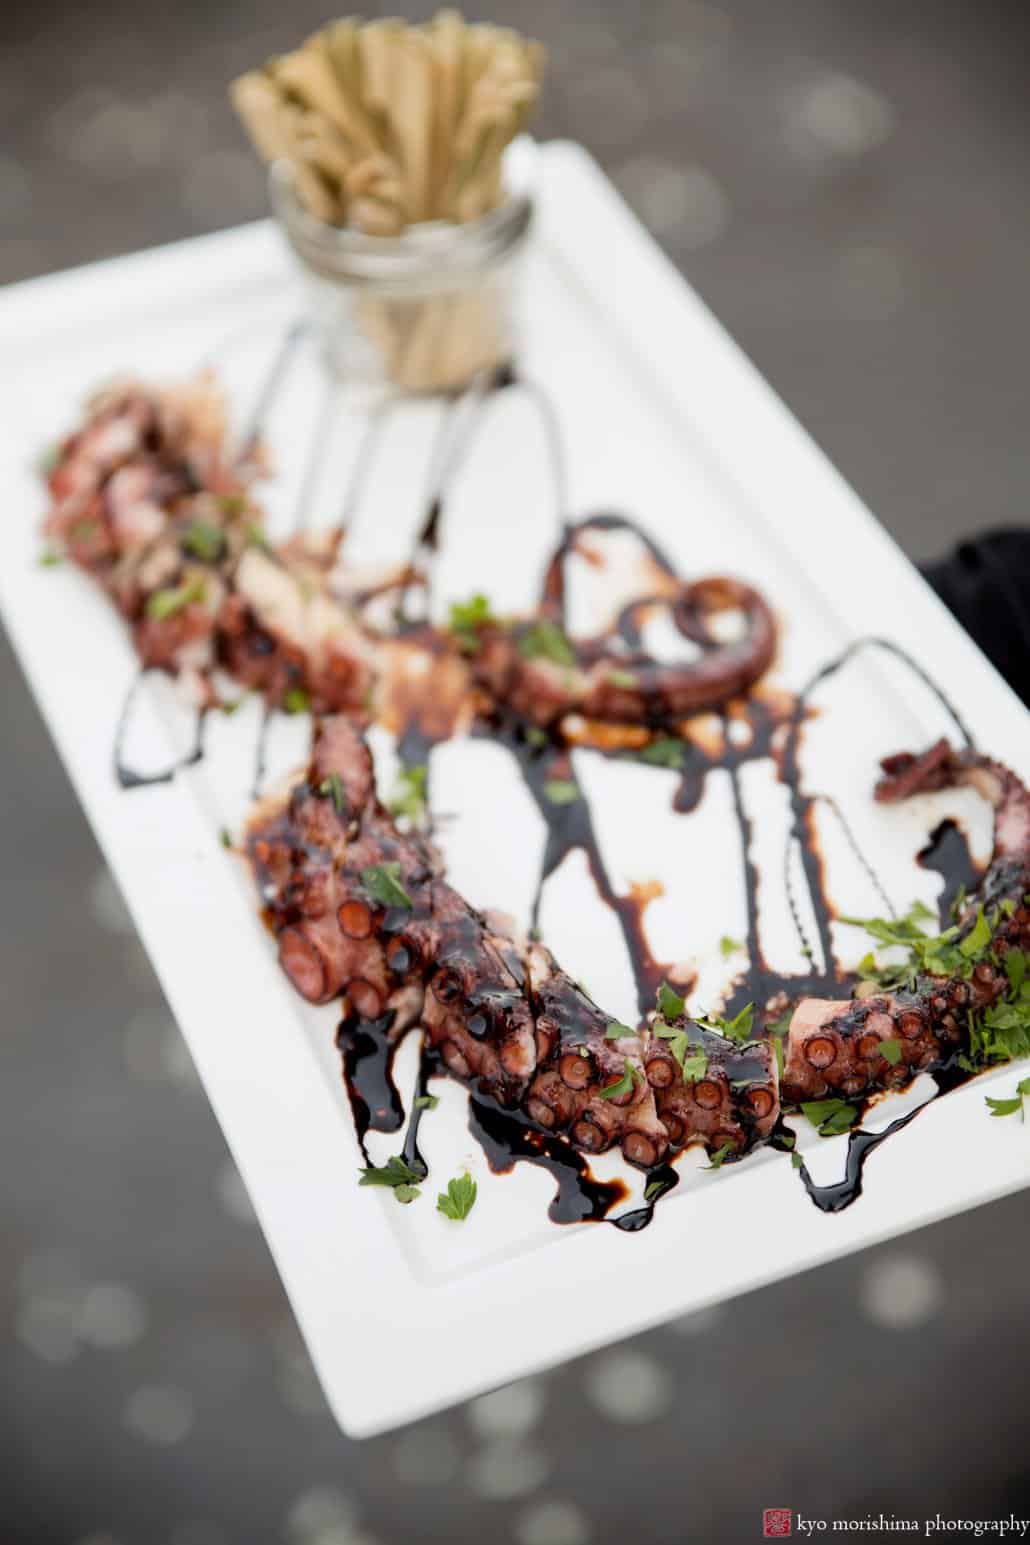 Octopus hors d'oeuvres by The Night Kitchen Catering at Green Building wedding, photographed by Kyo Morishima